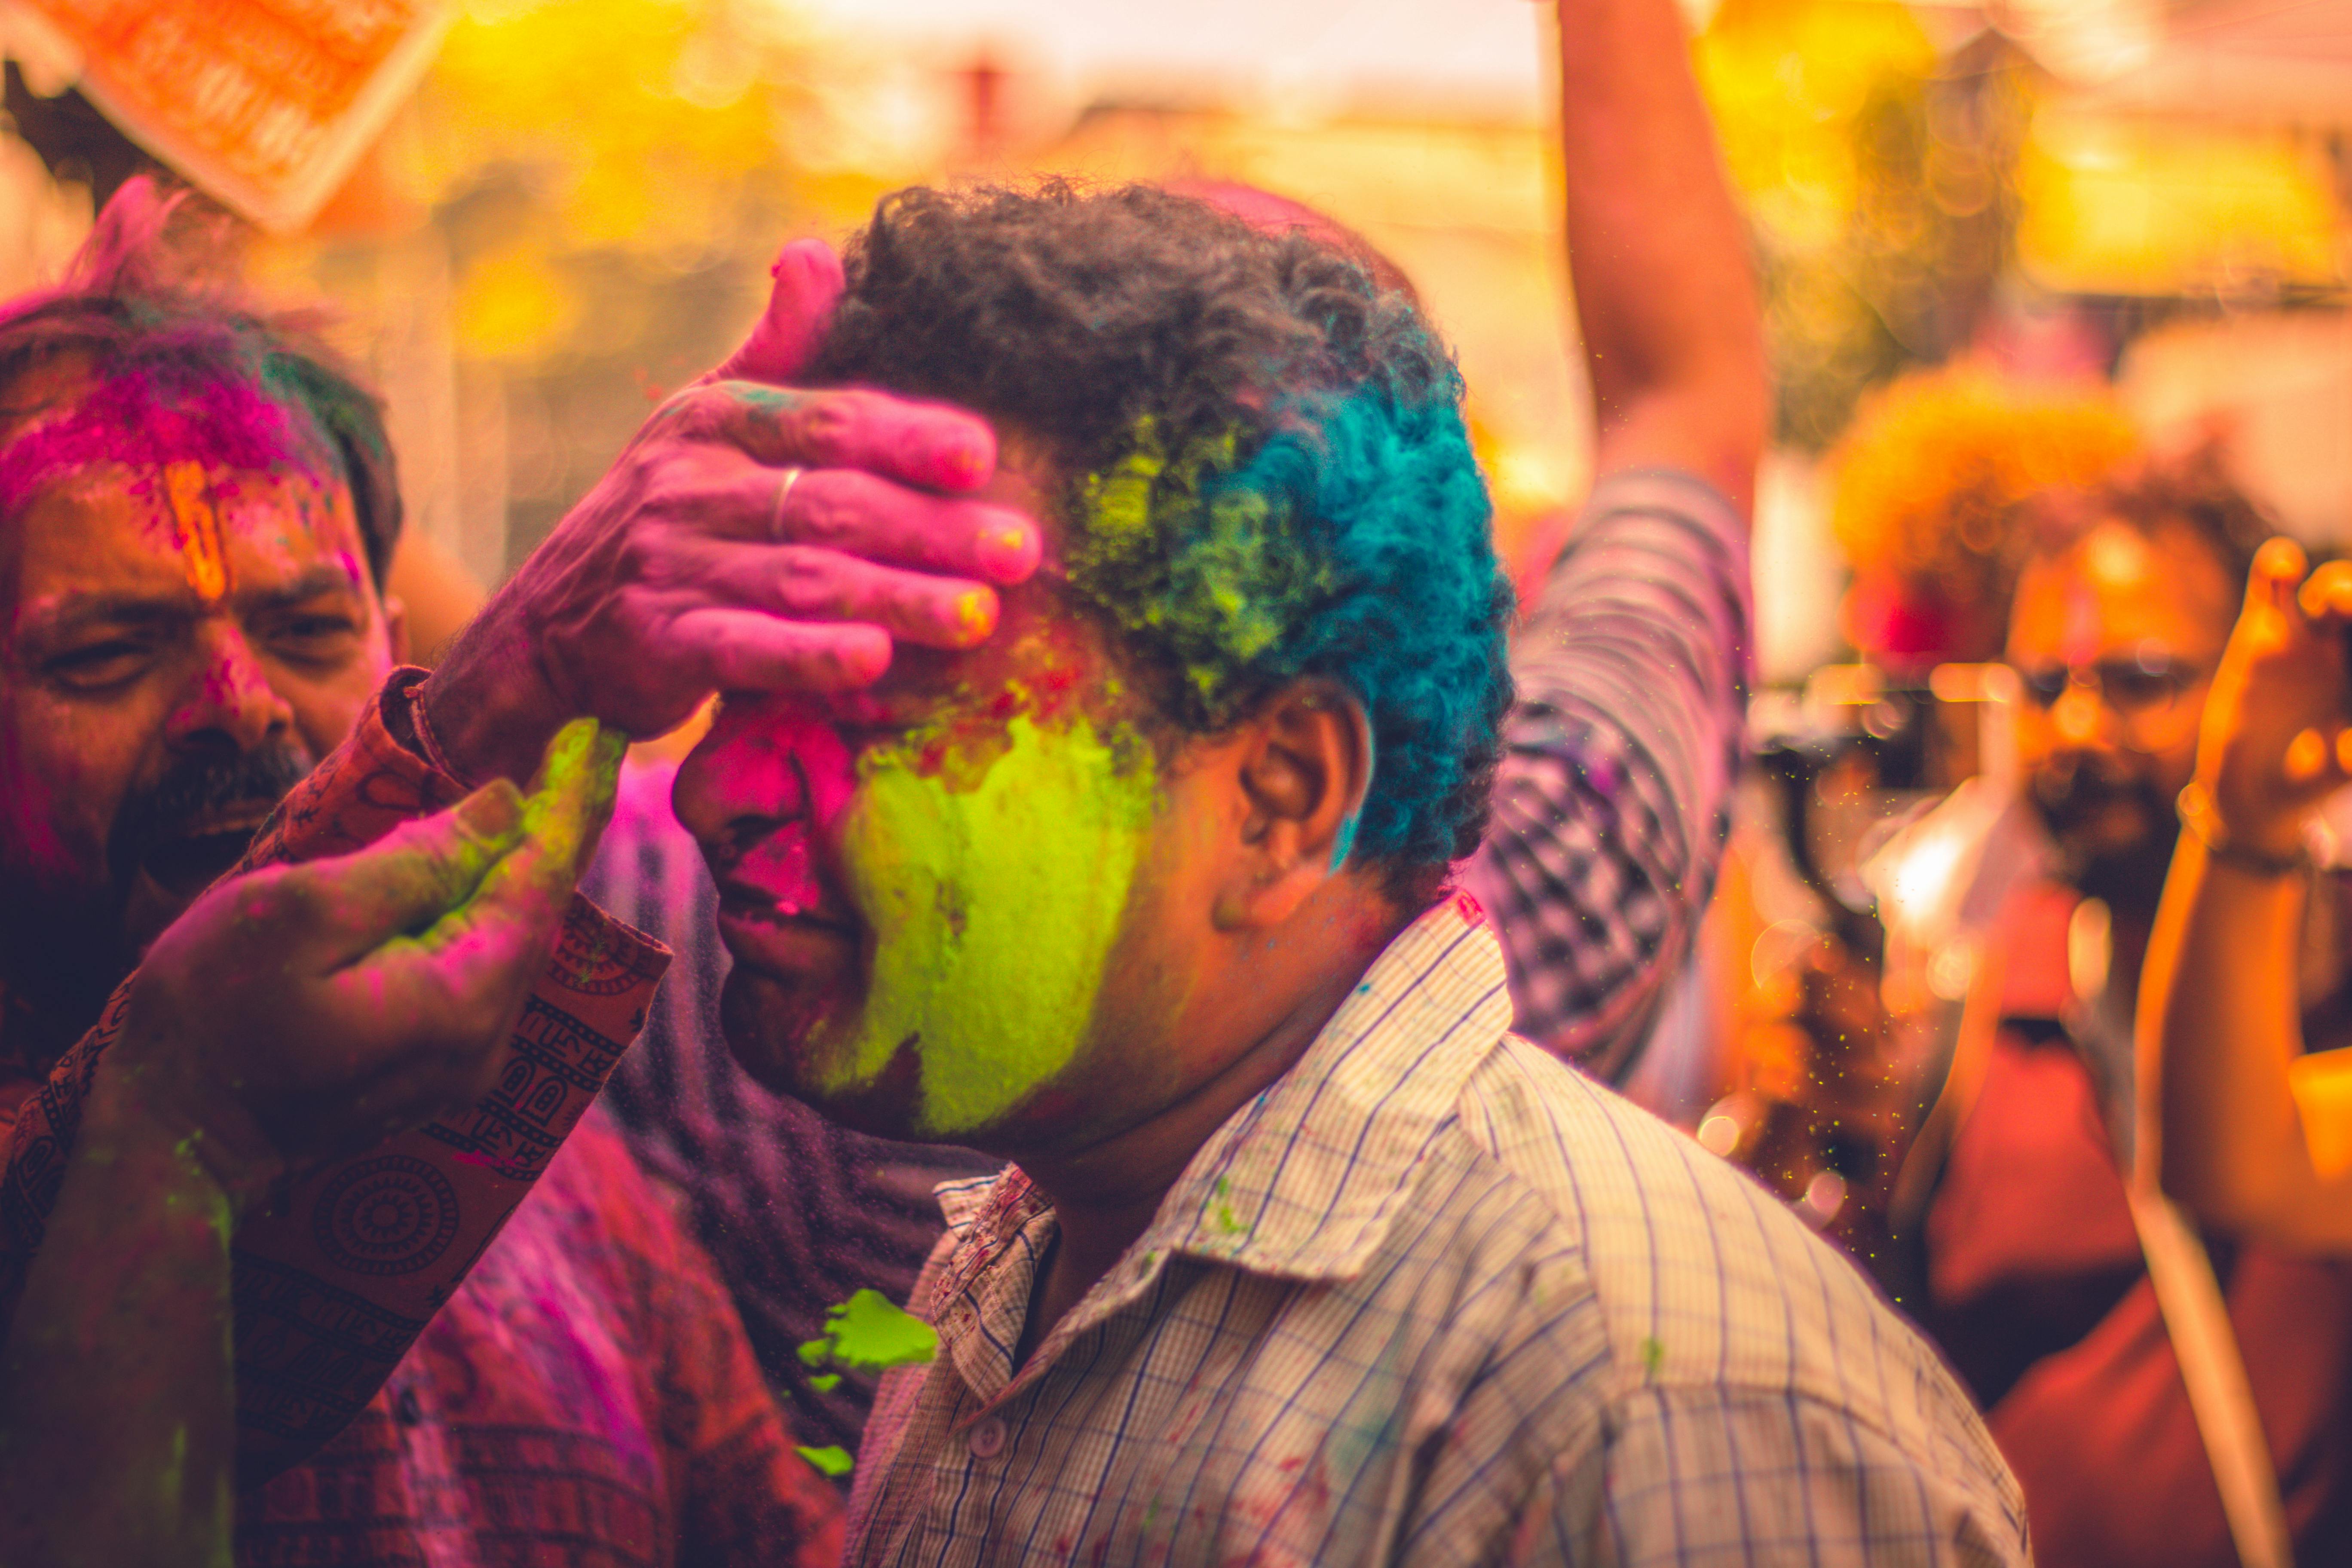 A man being covered in brightly dyed powder at an Indian holi festival